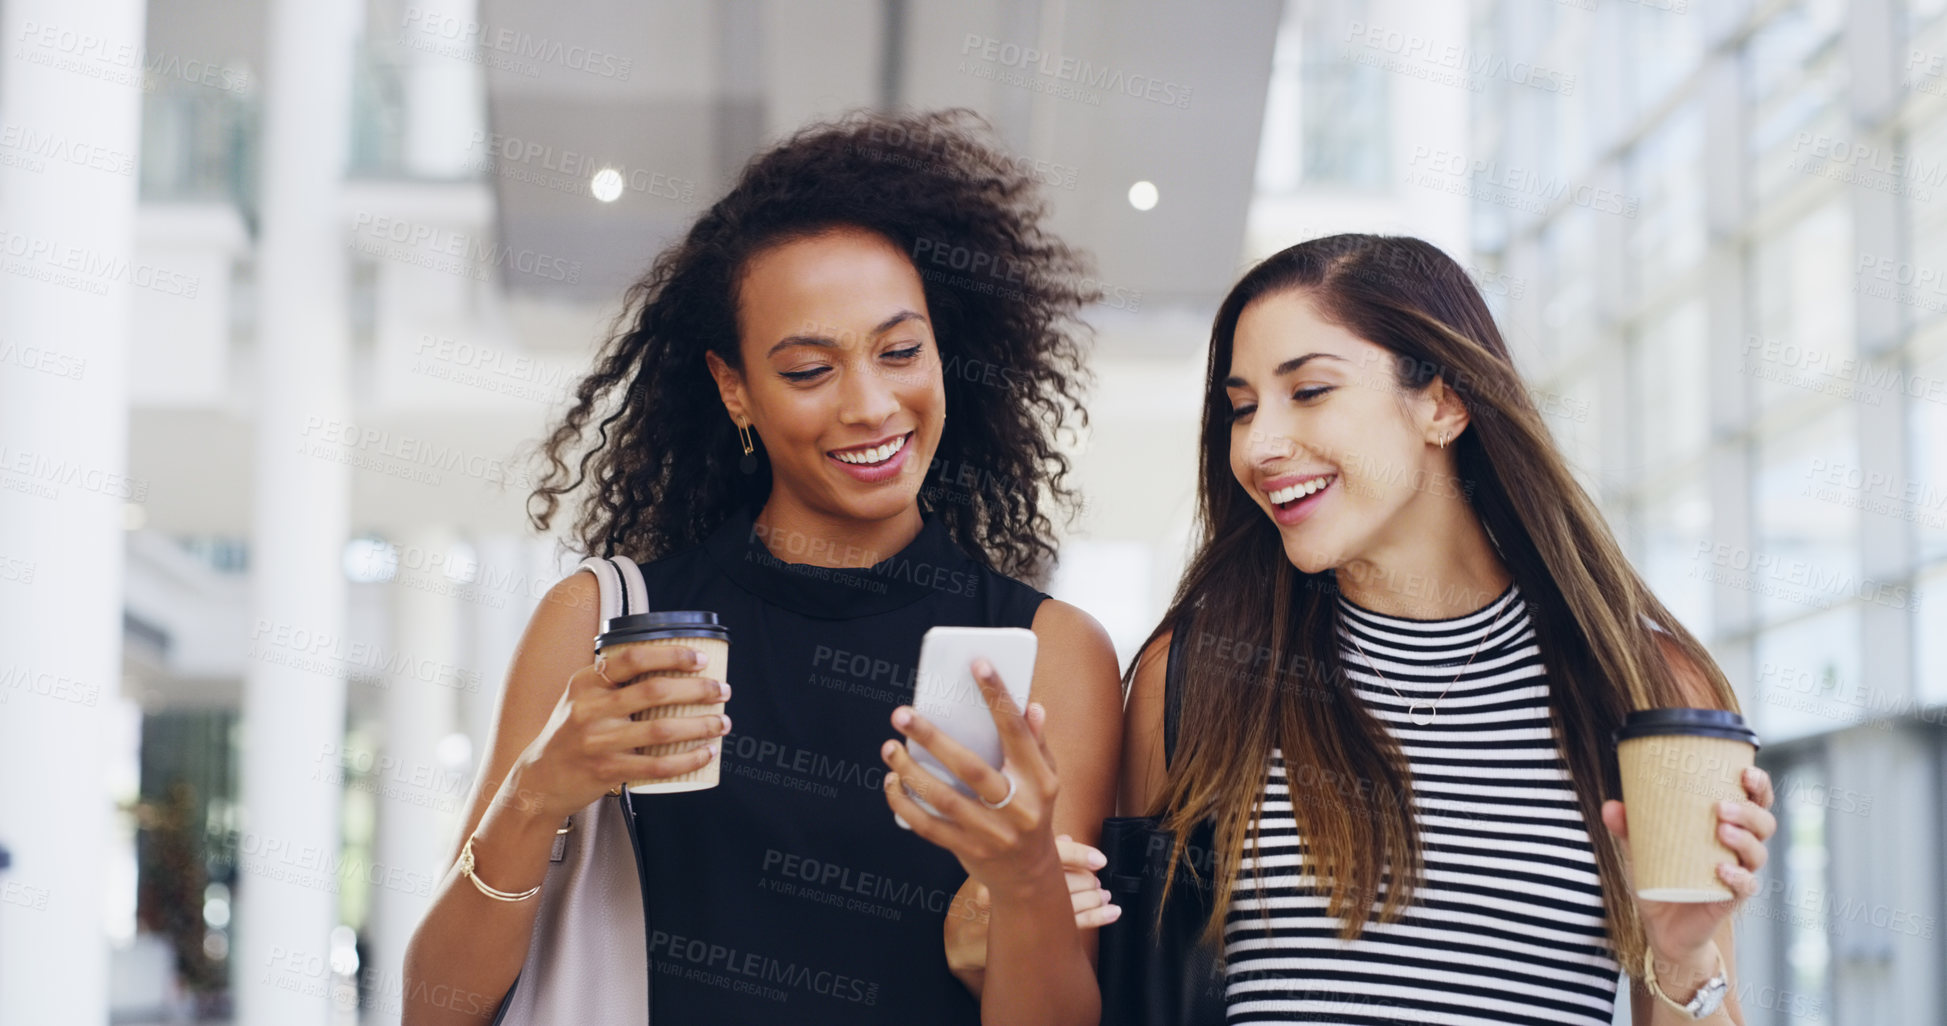 Buy stock photo Cropped shot of two young businesswomen chatting and using a smartphone while walking in an office on a coffee break